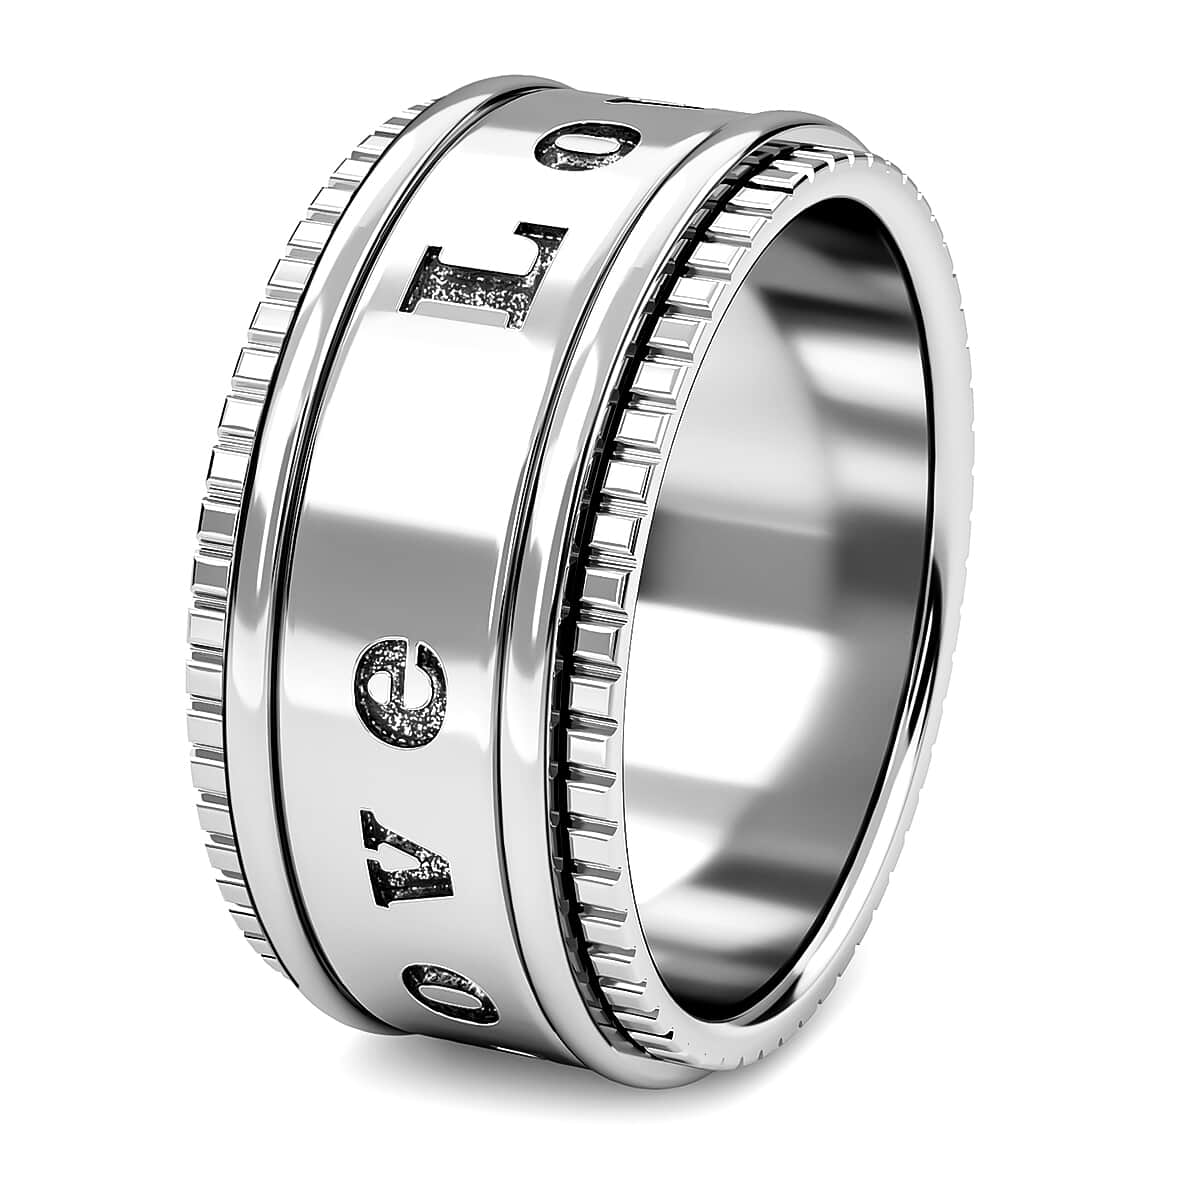 Sterling Silver LOVE Spinner Ring, Fidget Rings for Anxiety, Stress Relieving Anxiety Ring Band, Promise Rings 7.25 grams (Size 10) image number 5